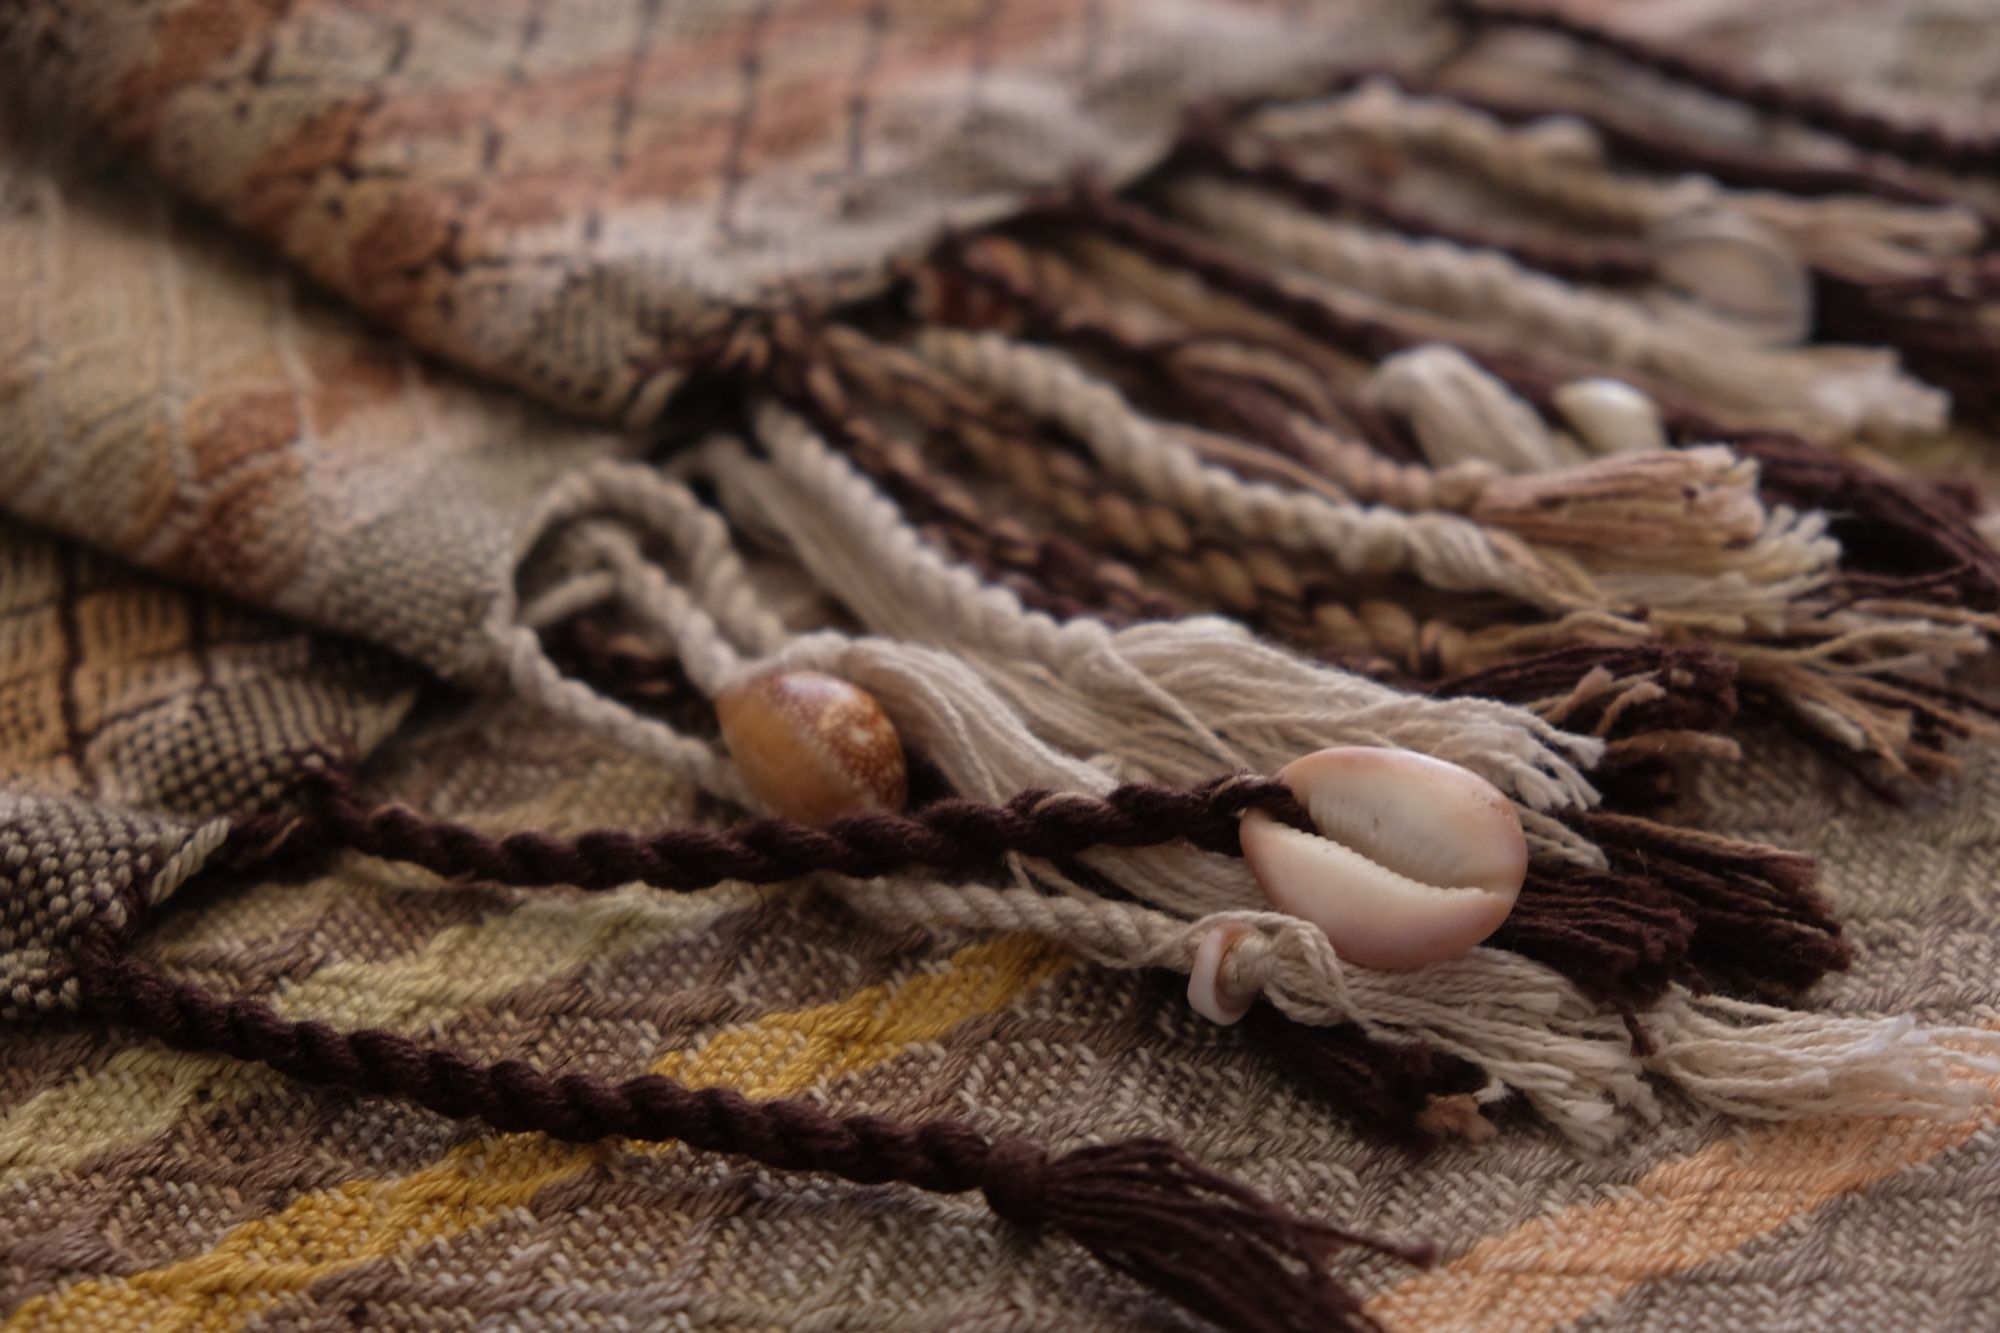 Detail of a handwoven pink, brown, tan, yellow and grey shawl with diamond pattern weave with long twined fringe and shells tied into it